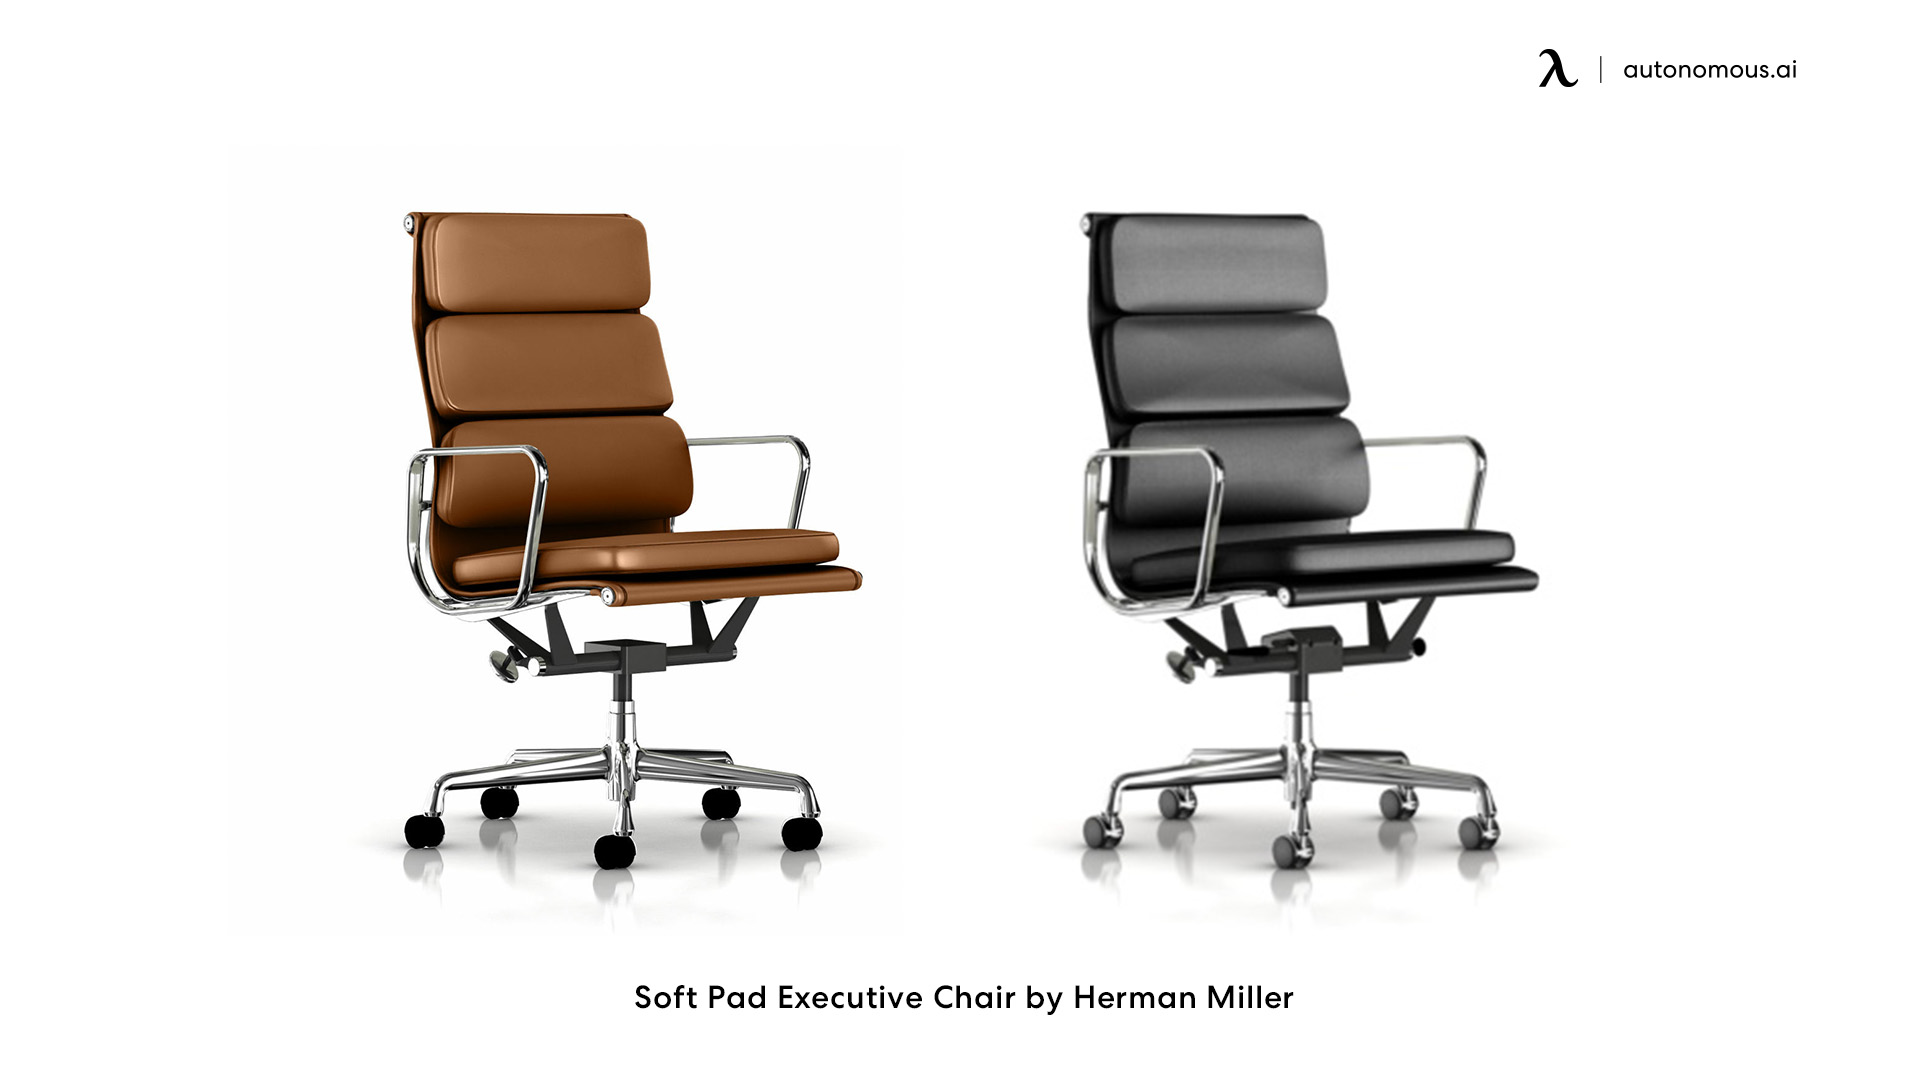 Soft Pad Executive Chair by Herman Miller